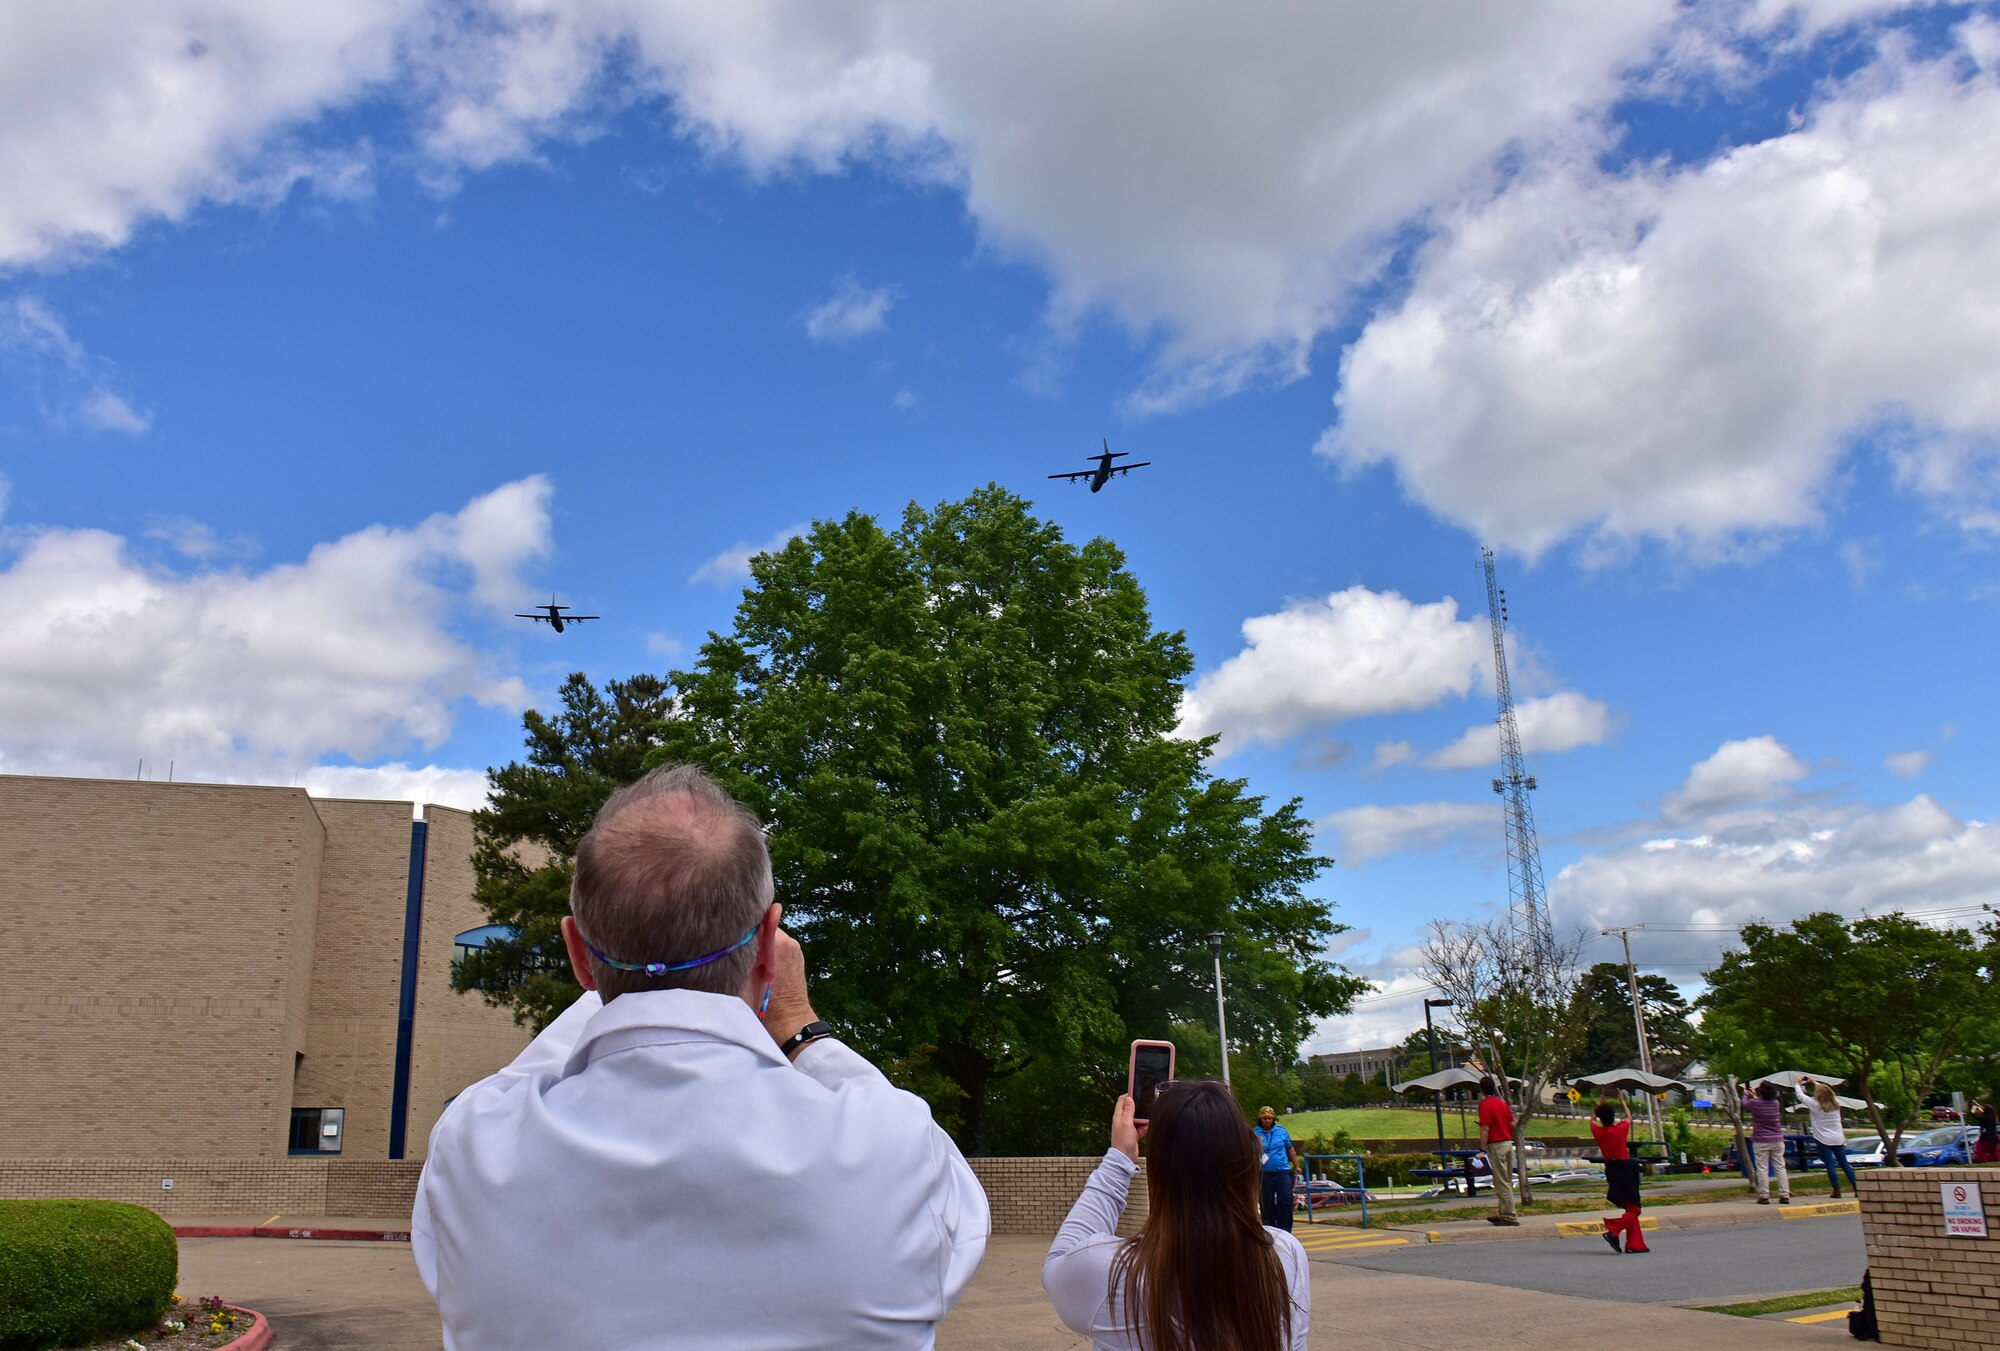 U.S. Air Force C-130s from Little Rock Air Force Base fly over Veterans Affairs Medical Center in downtown Little Rock Arkansas, May 8, 2020. The flyover was part of America Strong; a collaborative salute to recognize healthcare workers, first responders, military, and other essential personnel while standing in solidarity with all Americans during the COVID-19 pandemic. (U.S. Air Force photo by Staff Sgt. Jeremy McGuffin)